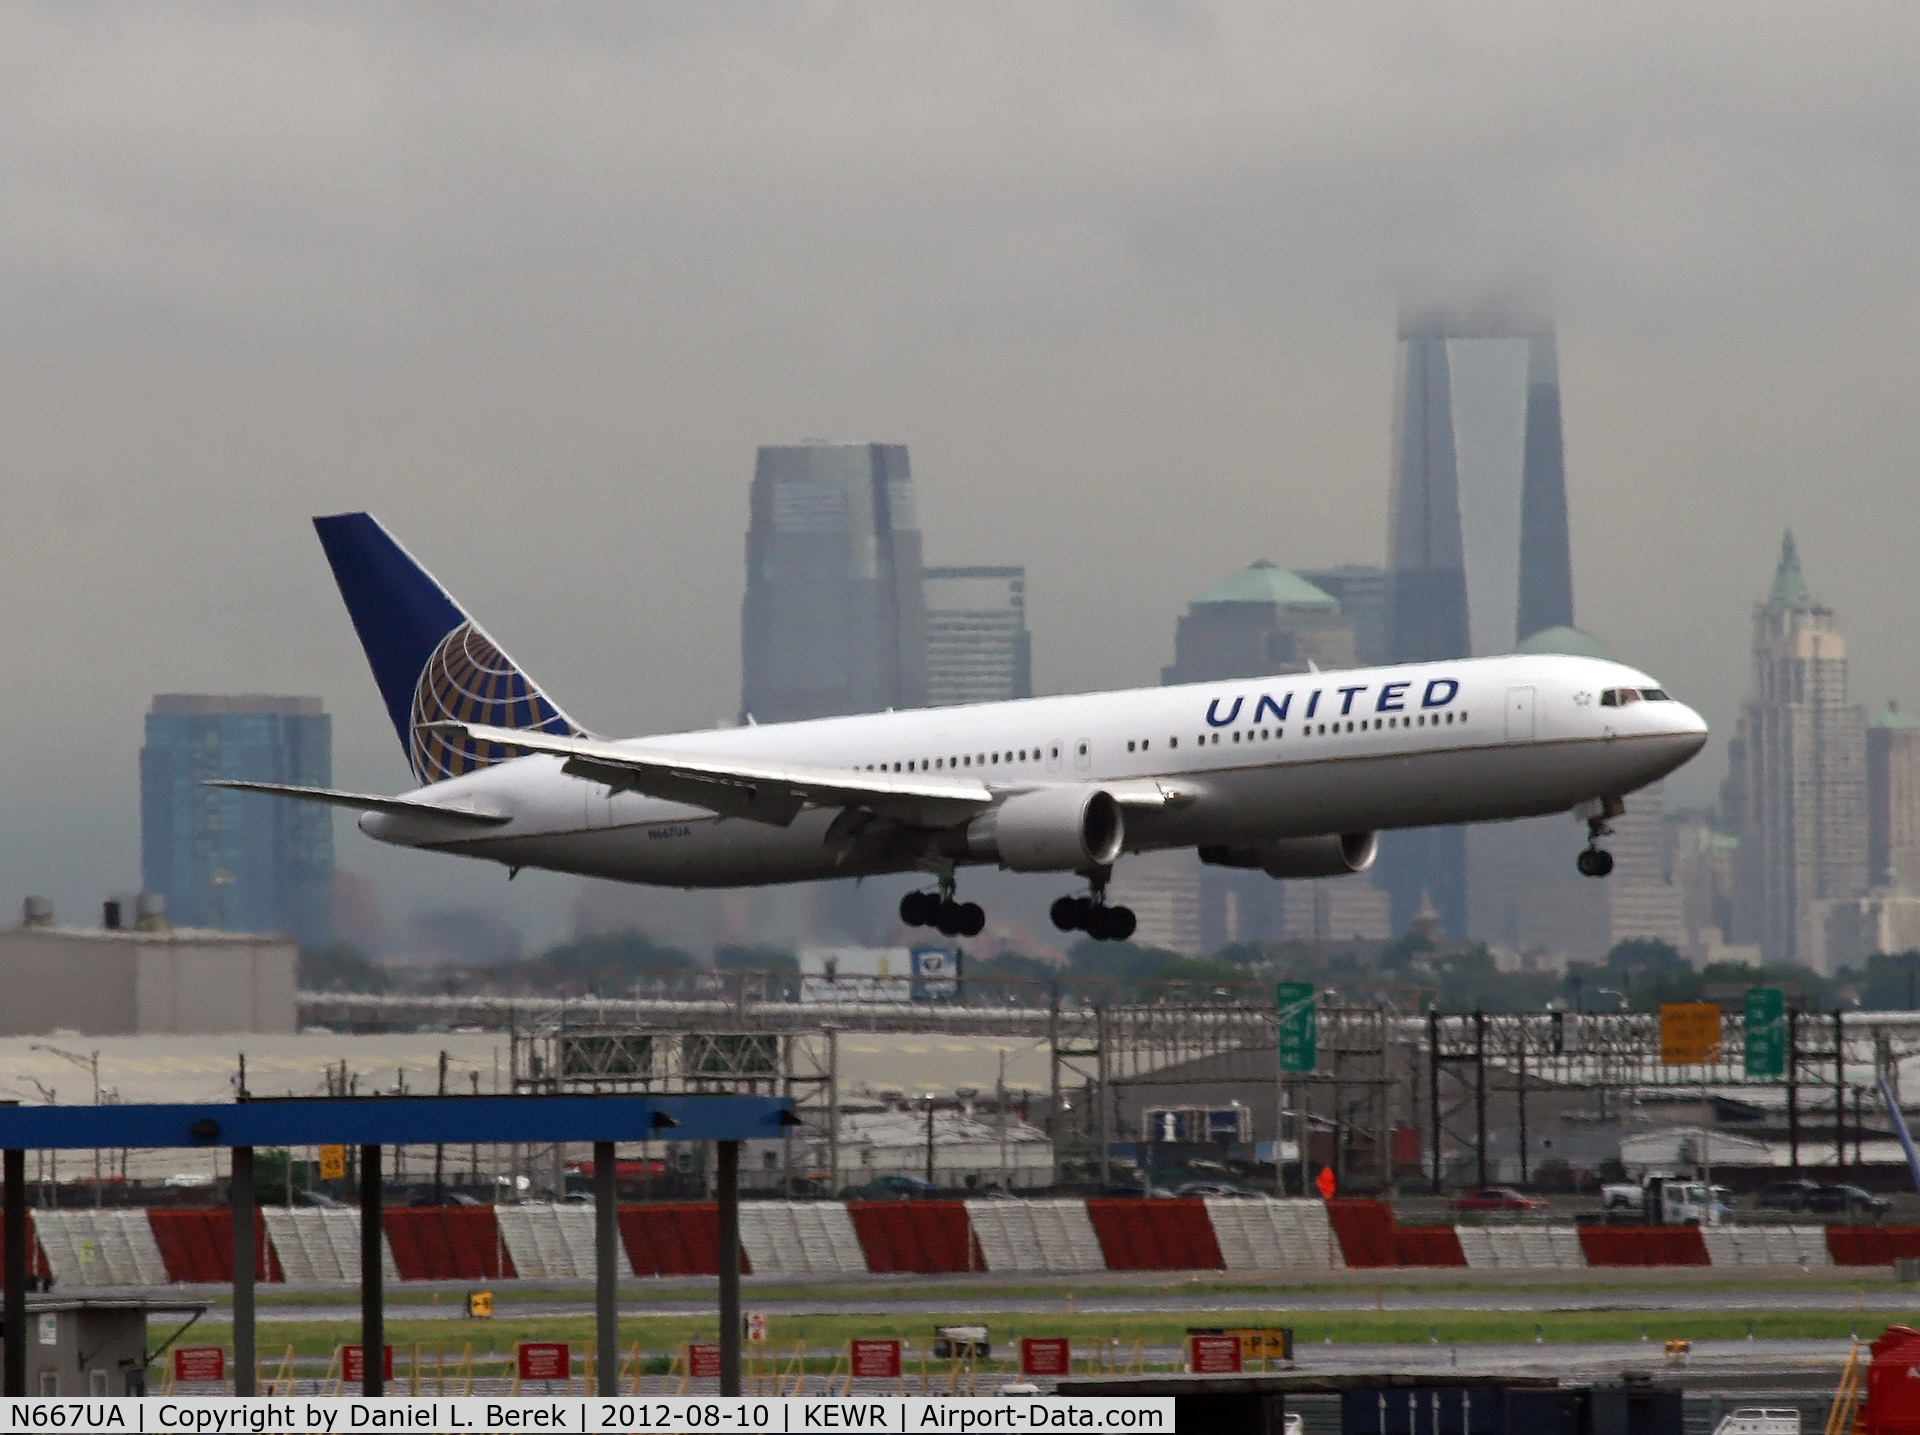 N667UA, 1998 Boeing 767-322 C/N 29239, The stormy sky and Manhattan skyline provide a dramatic backdrop as this UA Boeing 767 battles bad weather and strong winds to land on Newark's shortest runway.